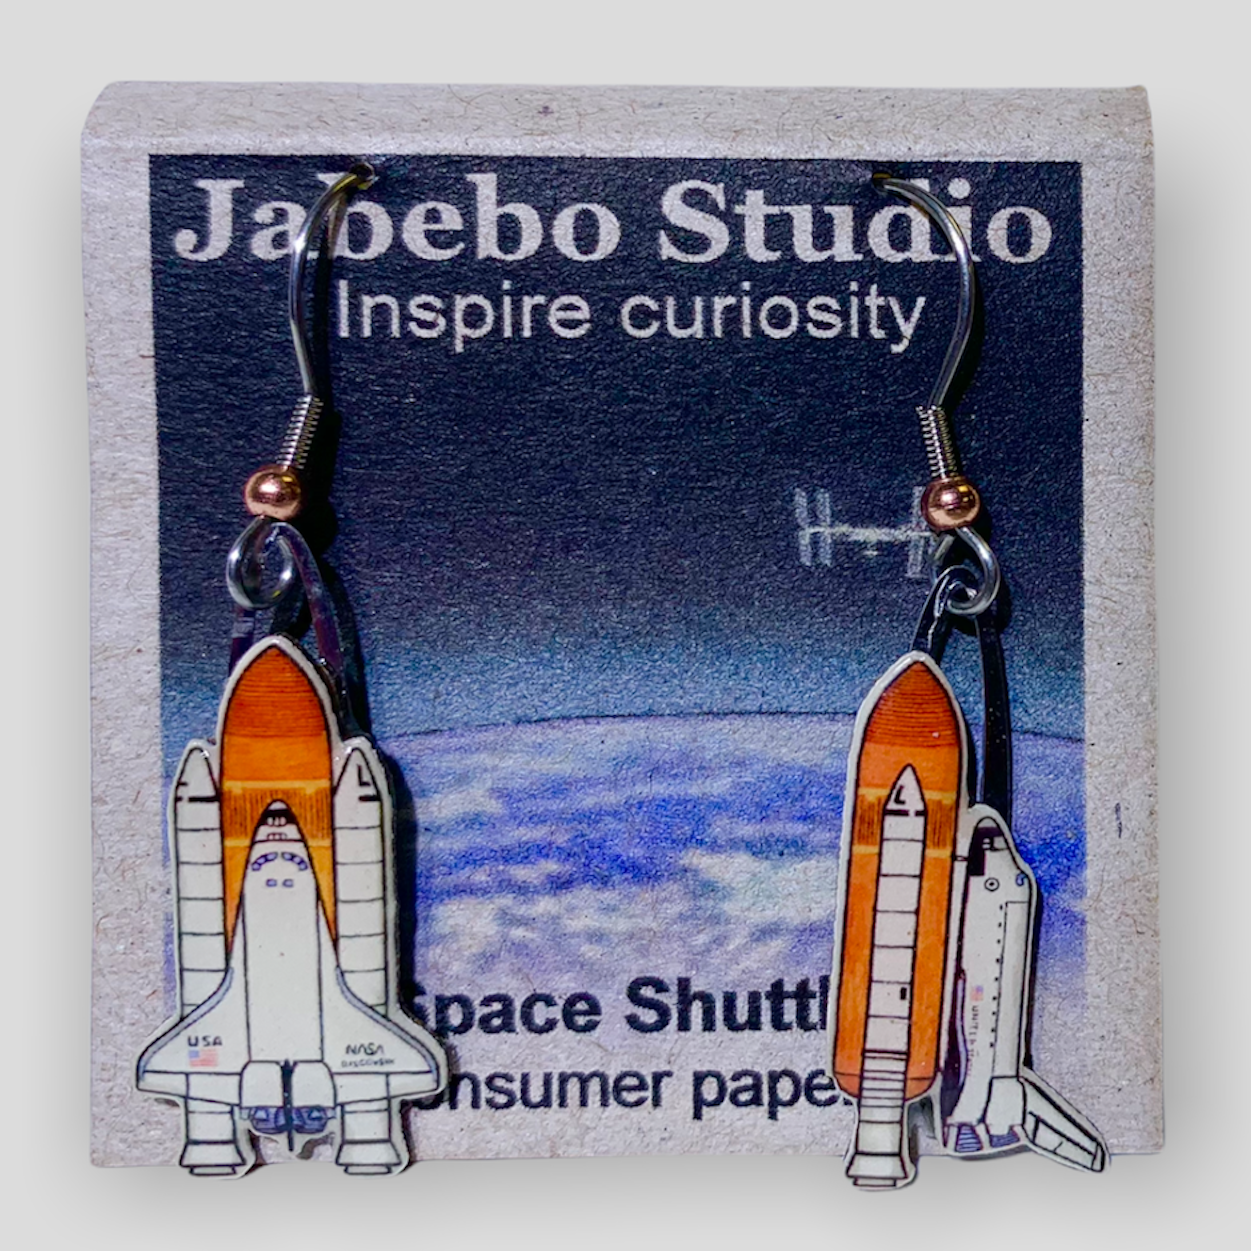 Picture shown is of 1 inch tall pair of earrings of the Space Shuttle.